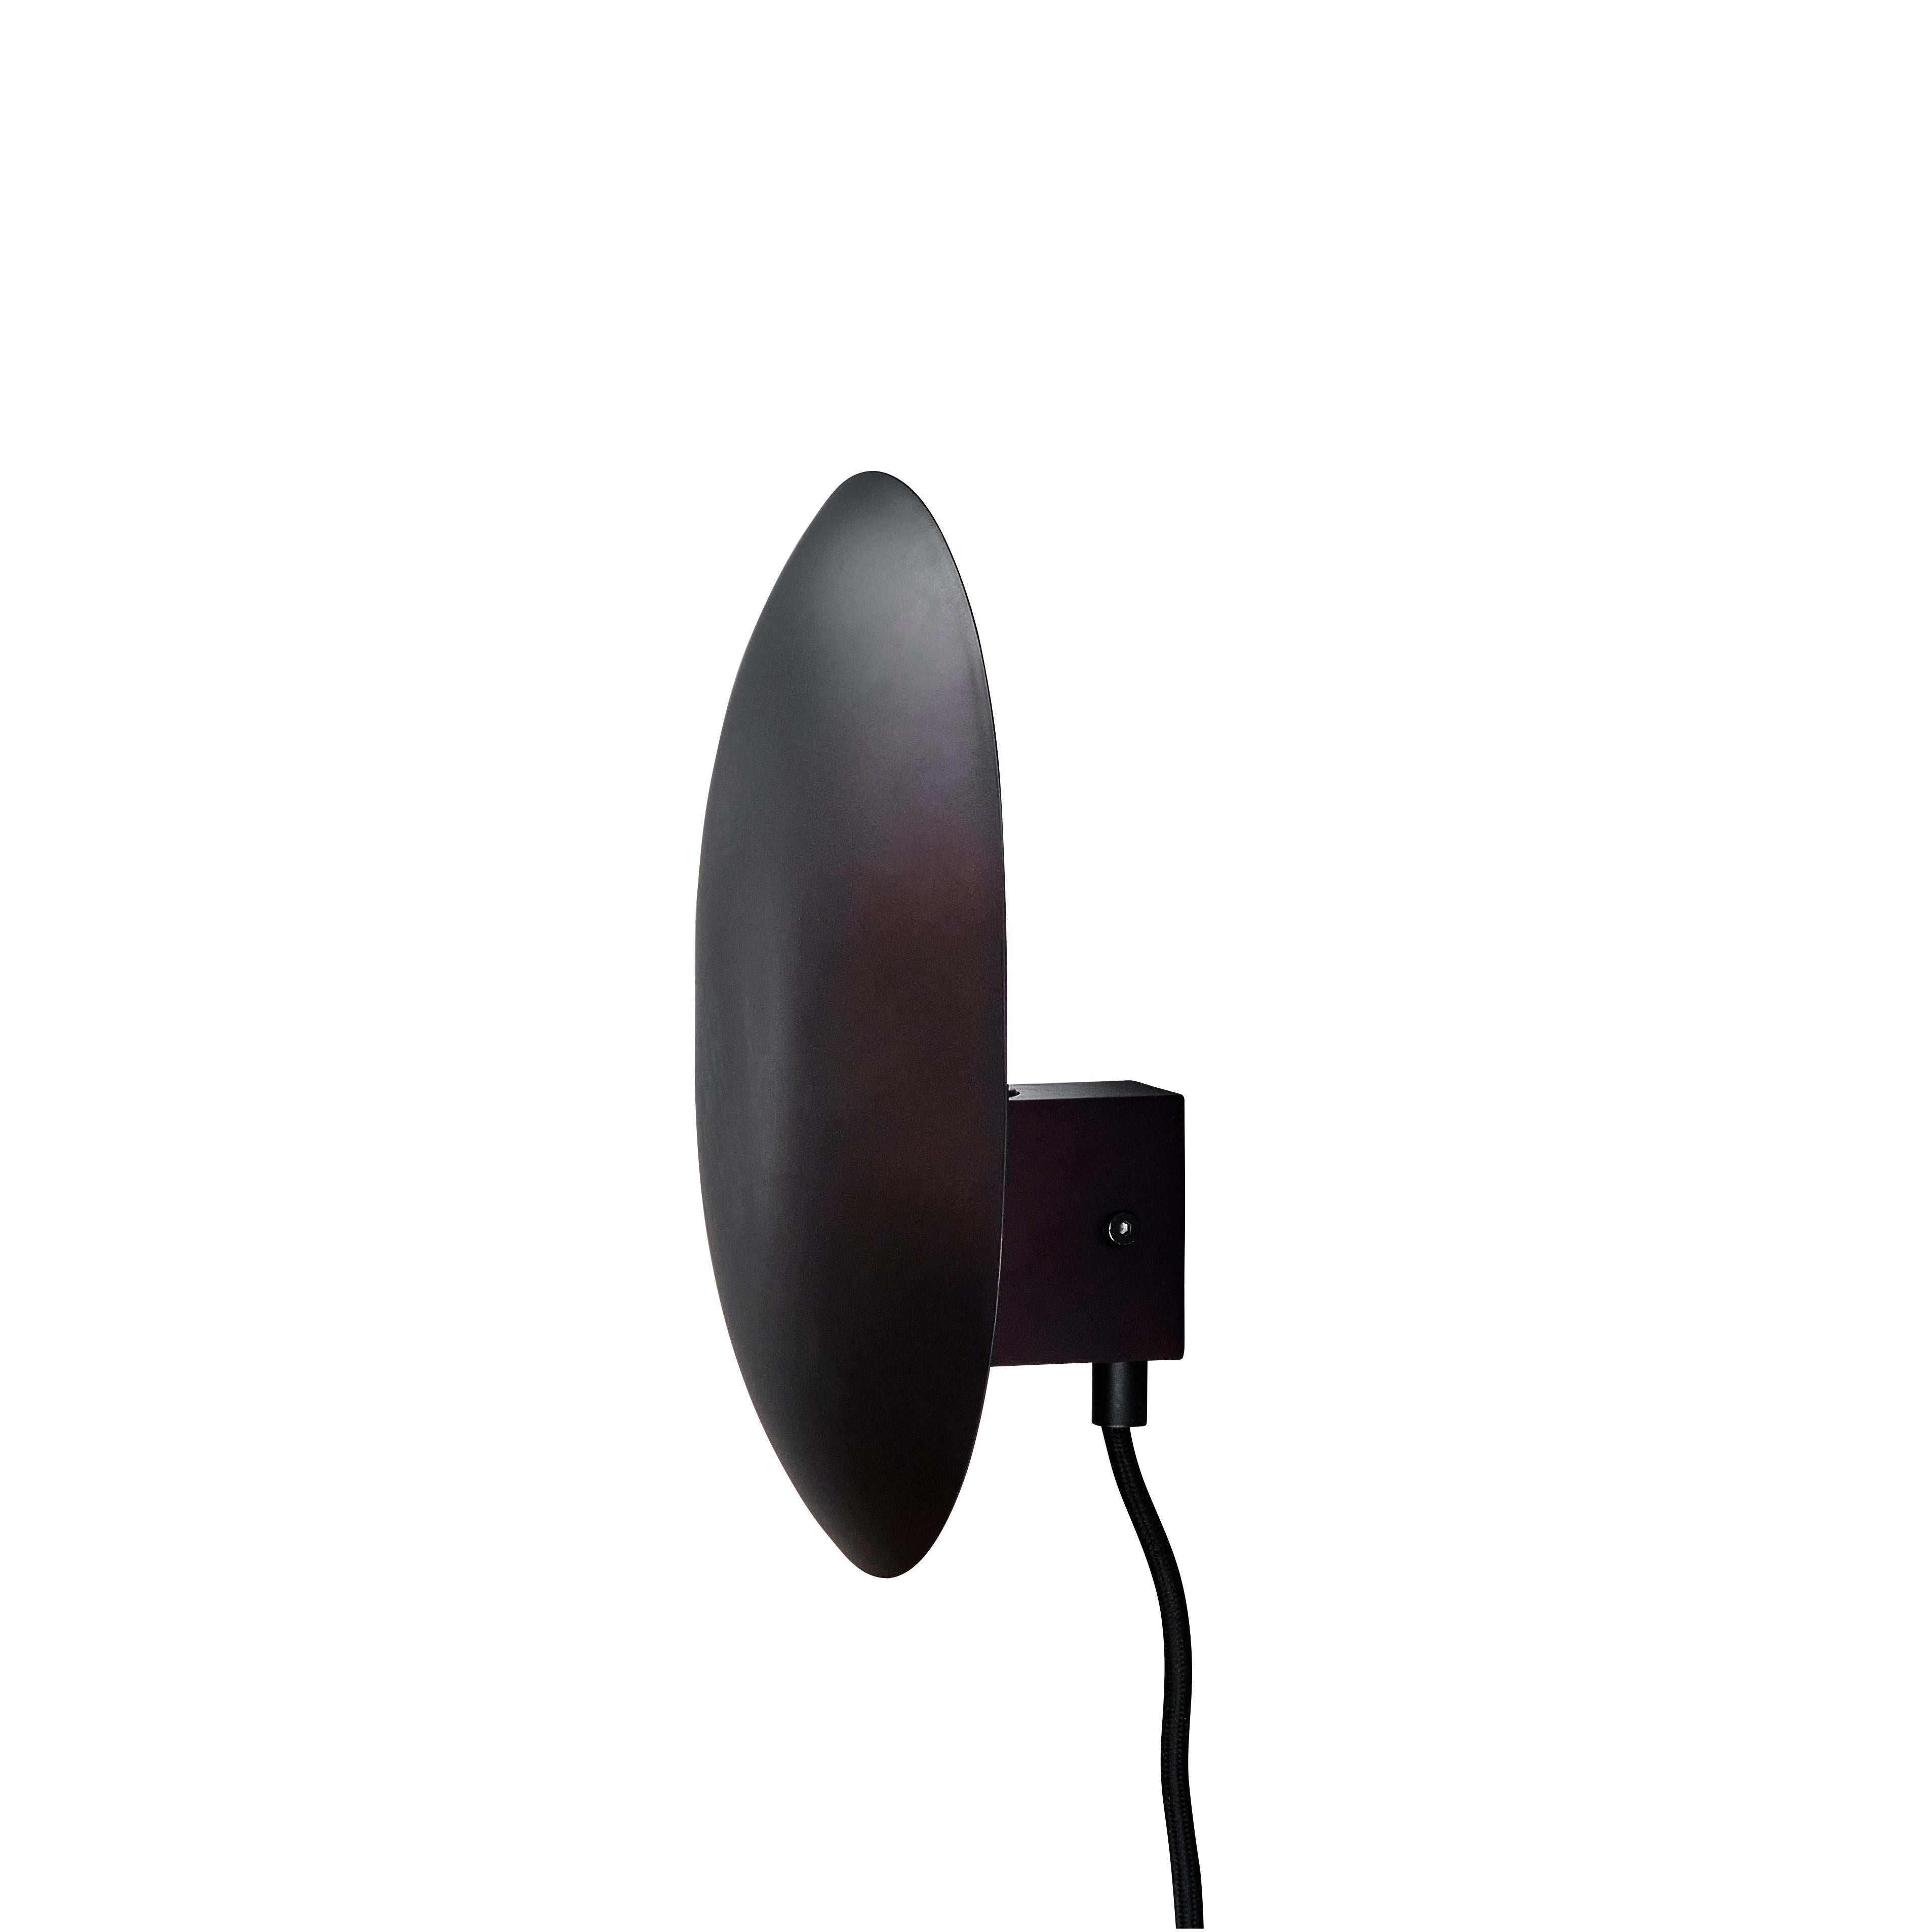 Burned black clam wall lamp by 101 Copenhagen
Designed by Kristian Sofus Hansen & Tommy Hyldahl
Dimensions: L 14 x W 22 x H 26 cm
Cable length: 170 cm

Materials: metal: plated metal / burned black
Cable: fabric covered cable /